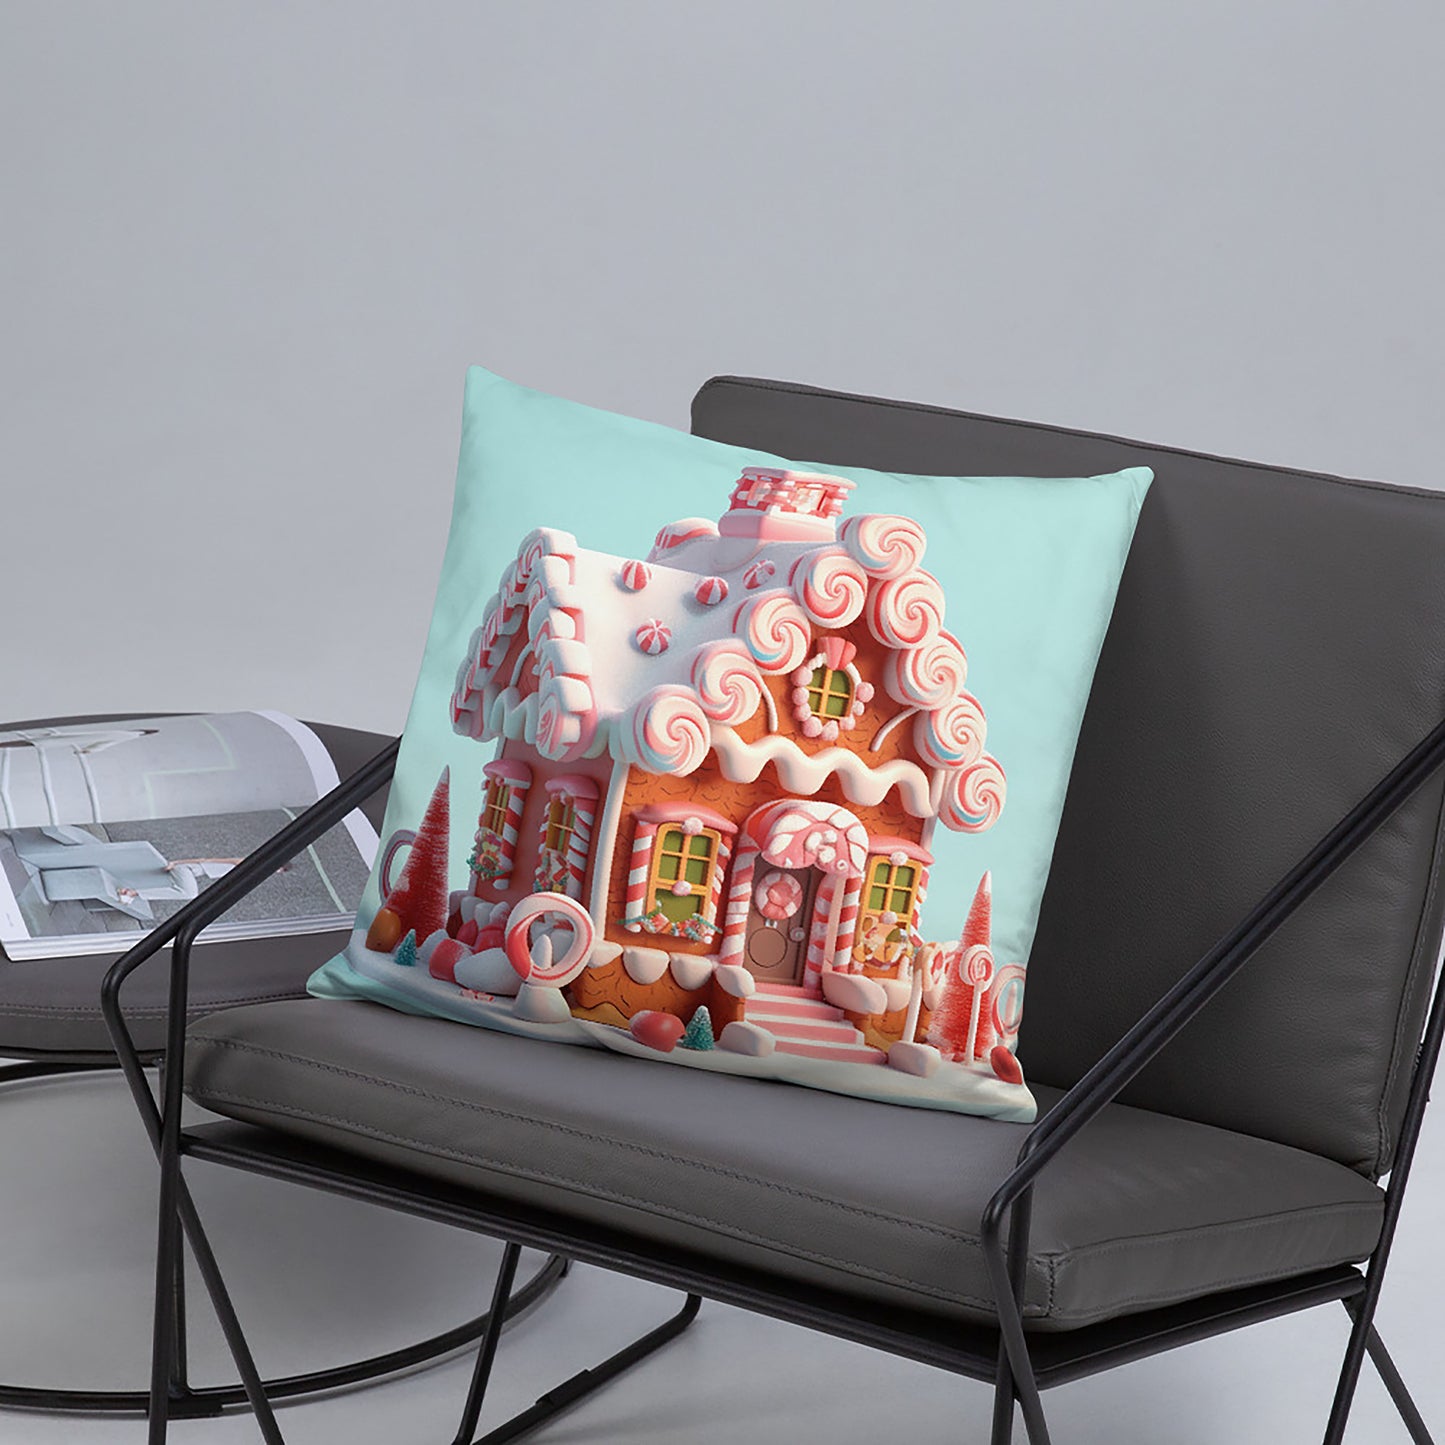 Christmas Throw Pillow Charming Gingerbread House Polyester Decorative Cushion 18x18